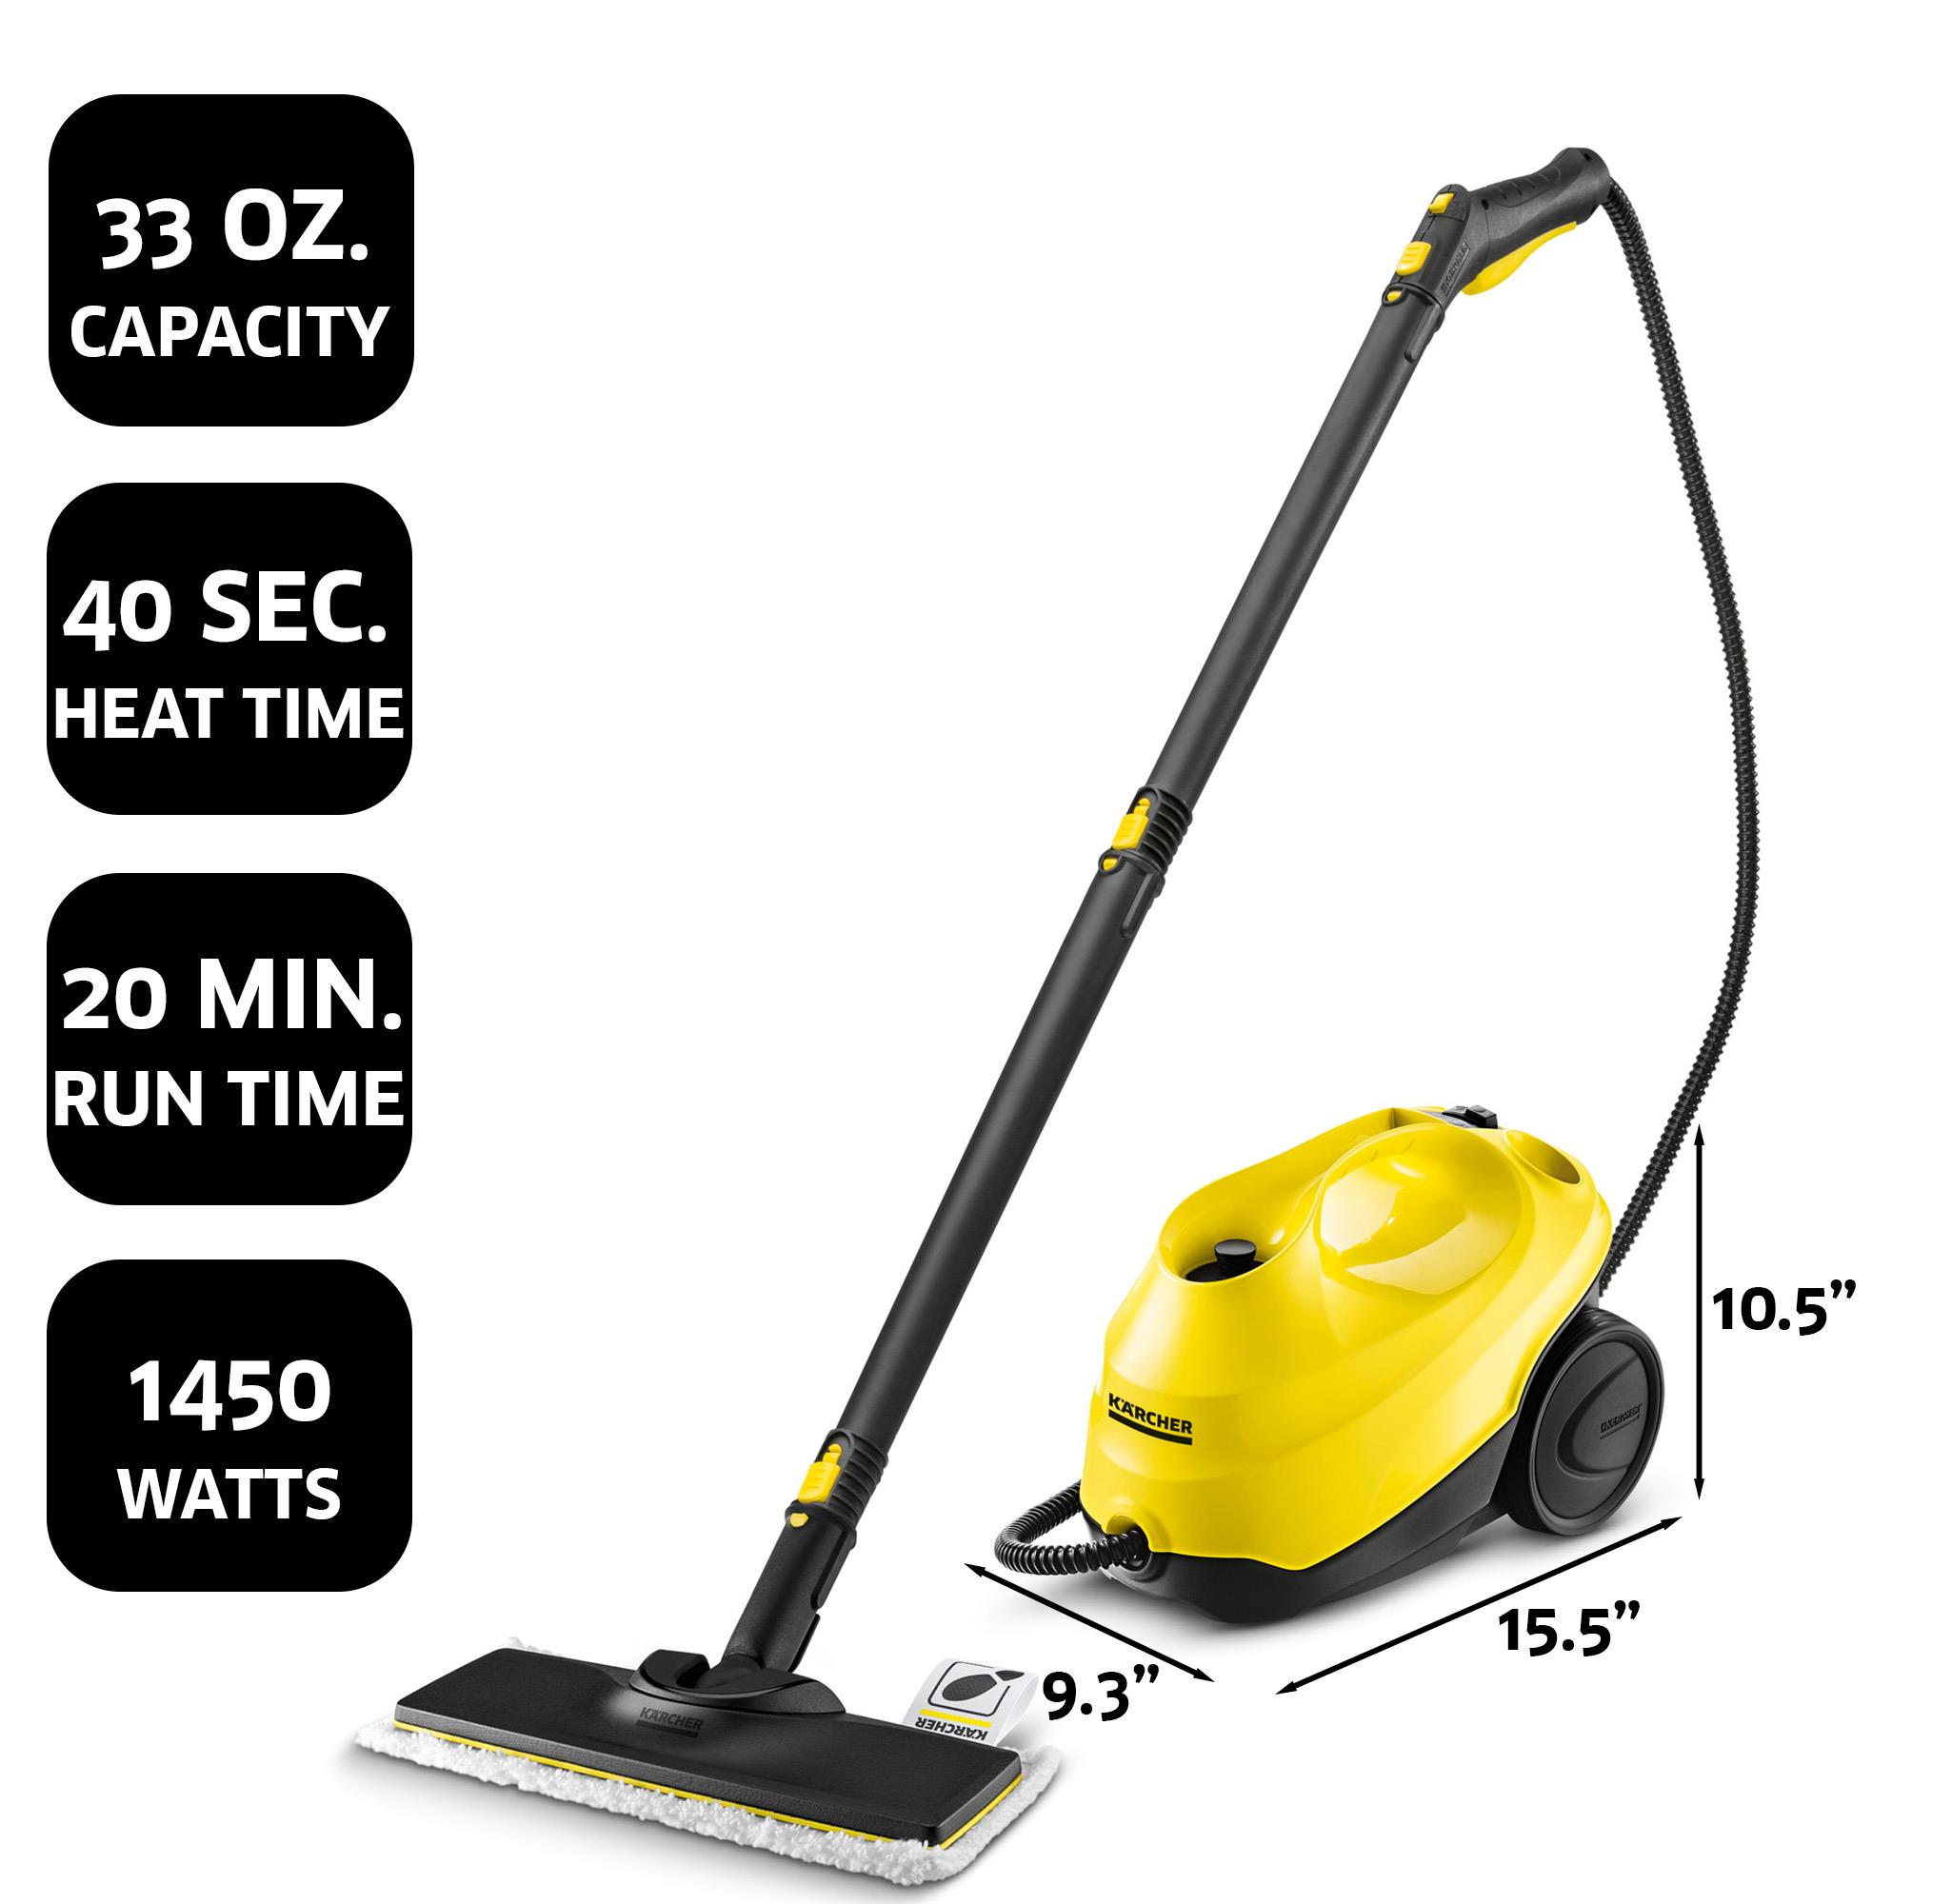 Karcher SC 3 EasyFix Steam Cleaner with Attachments in Yellow